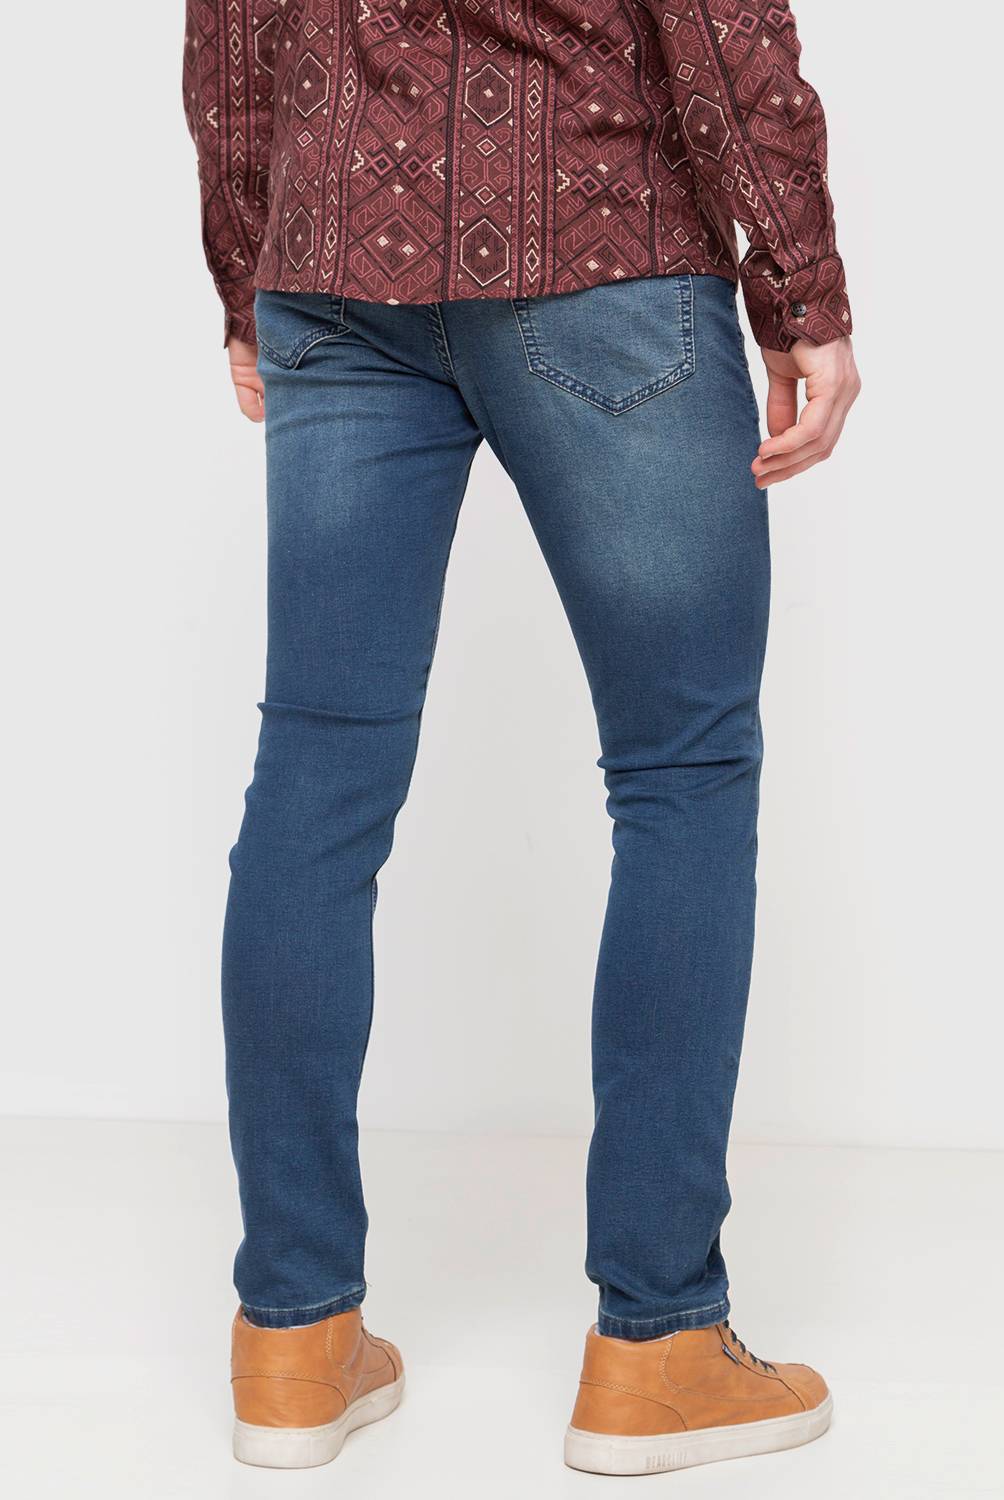 BEARCLIFF - Jeans Skinny Fit Hombre